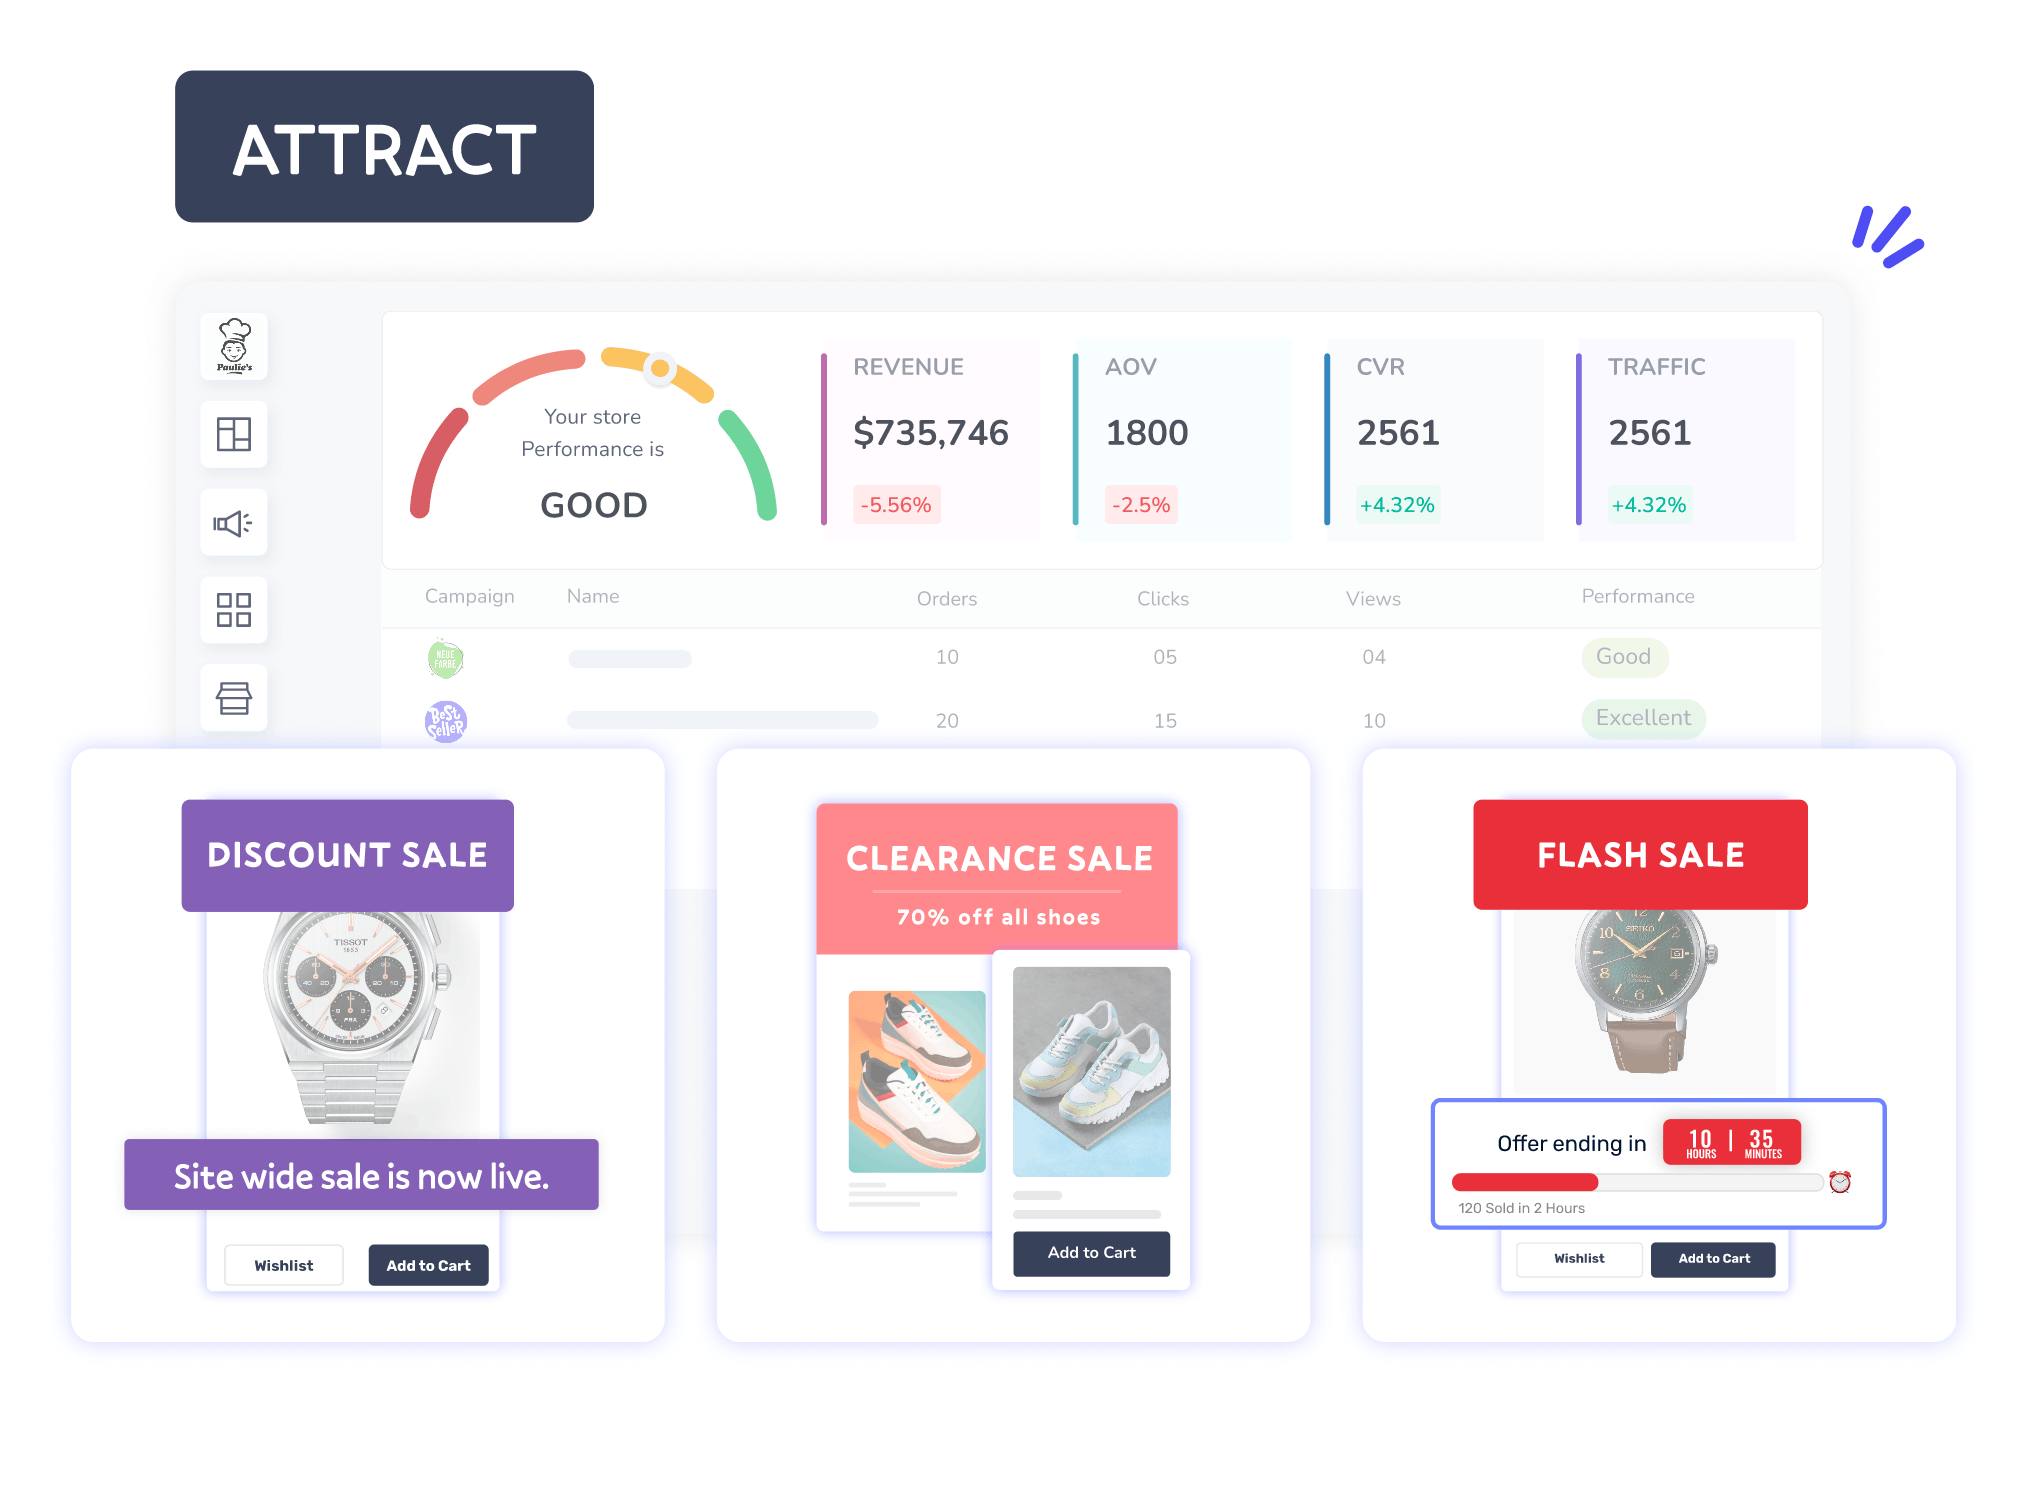 ModeMagic - AI Sales Engine For Ecommerce Stores